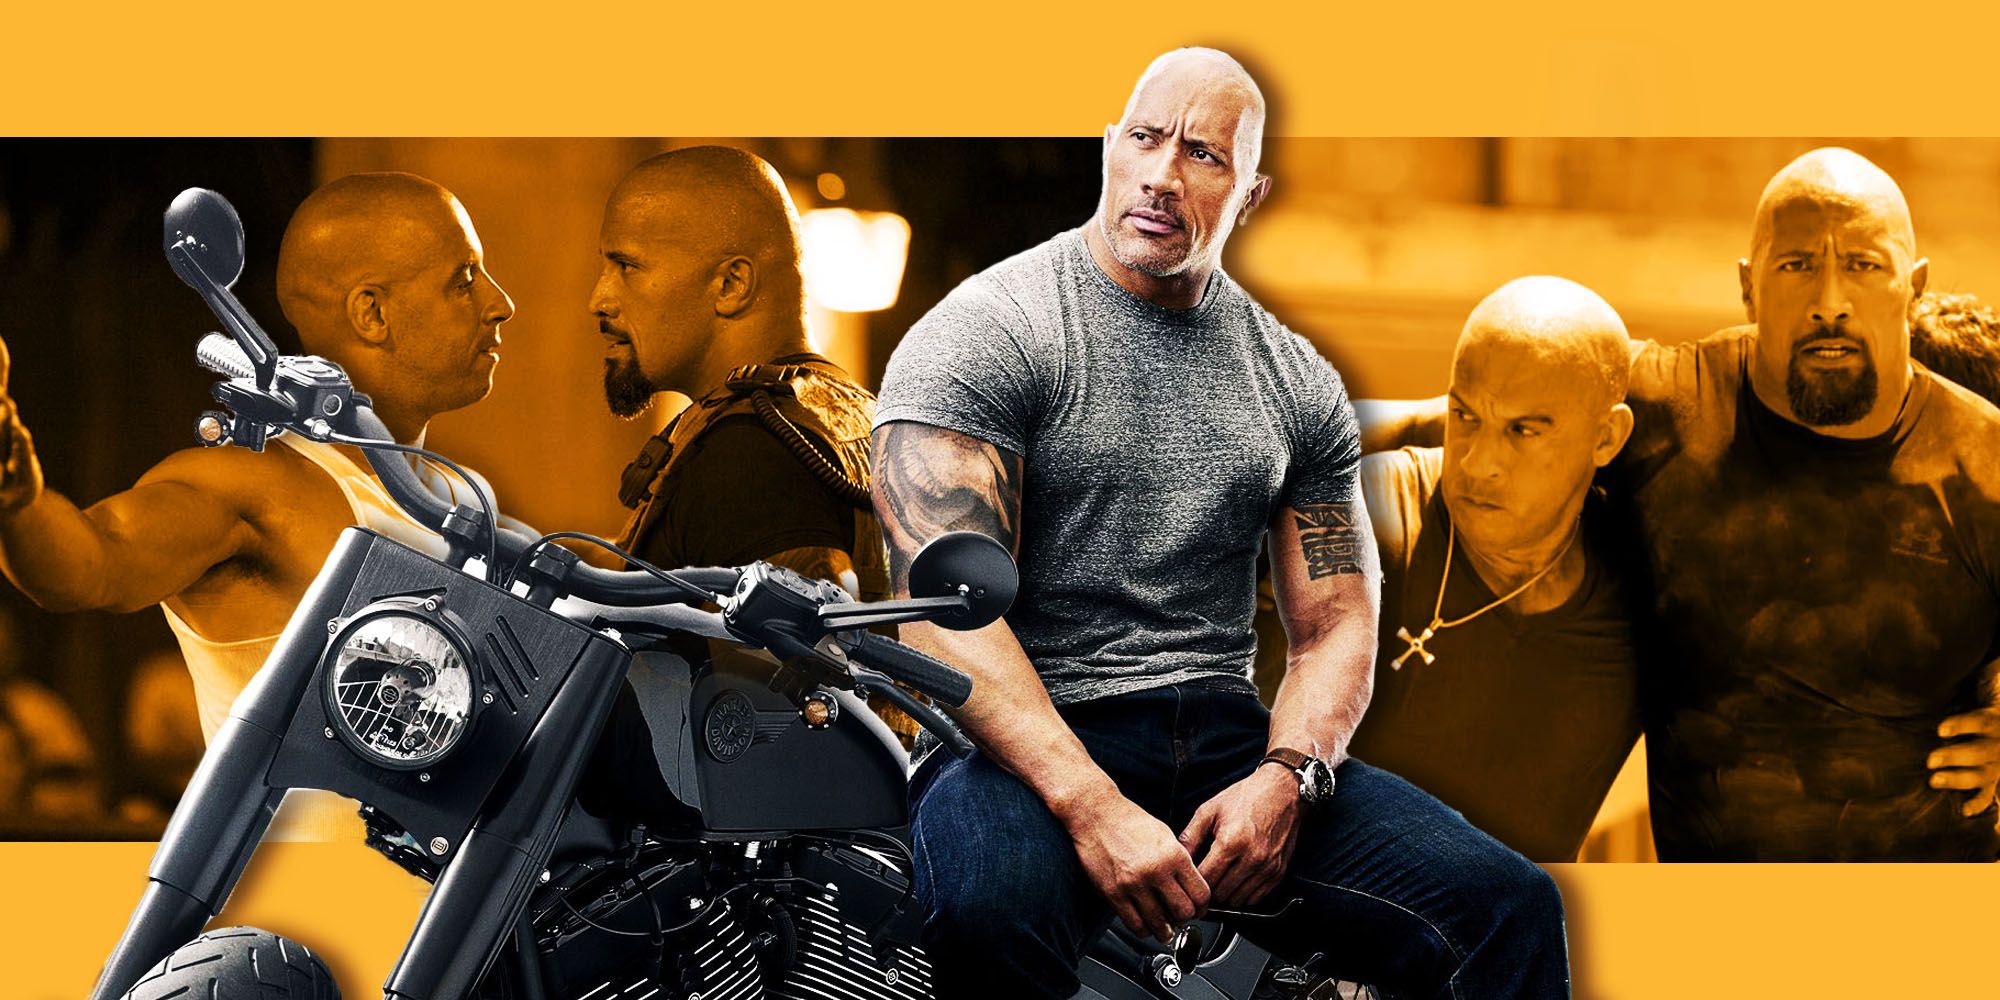 Blended image of The Rock and Vin Diesel in the Fast and Furious franchise